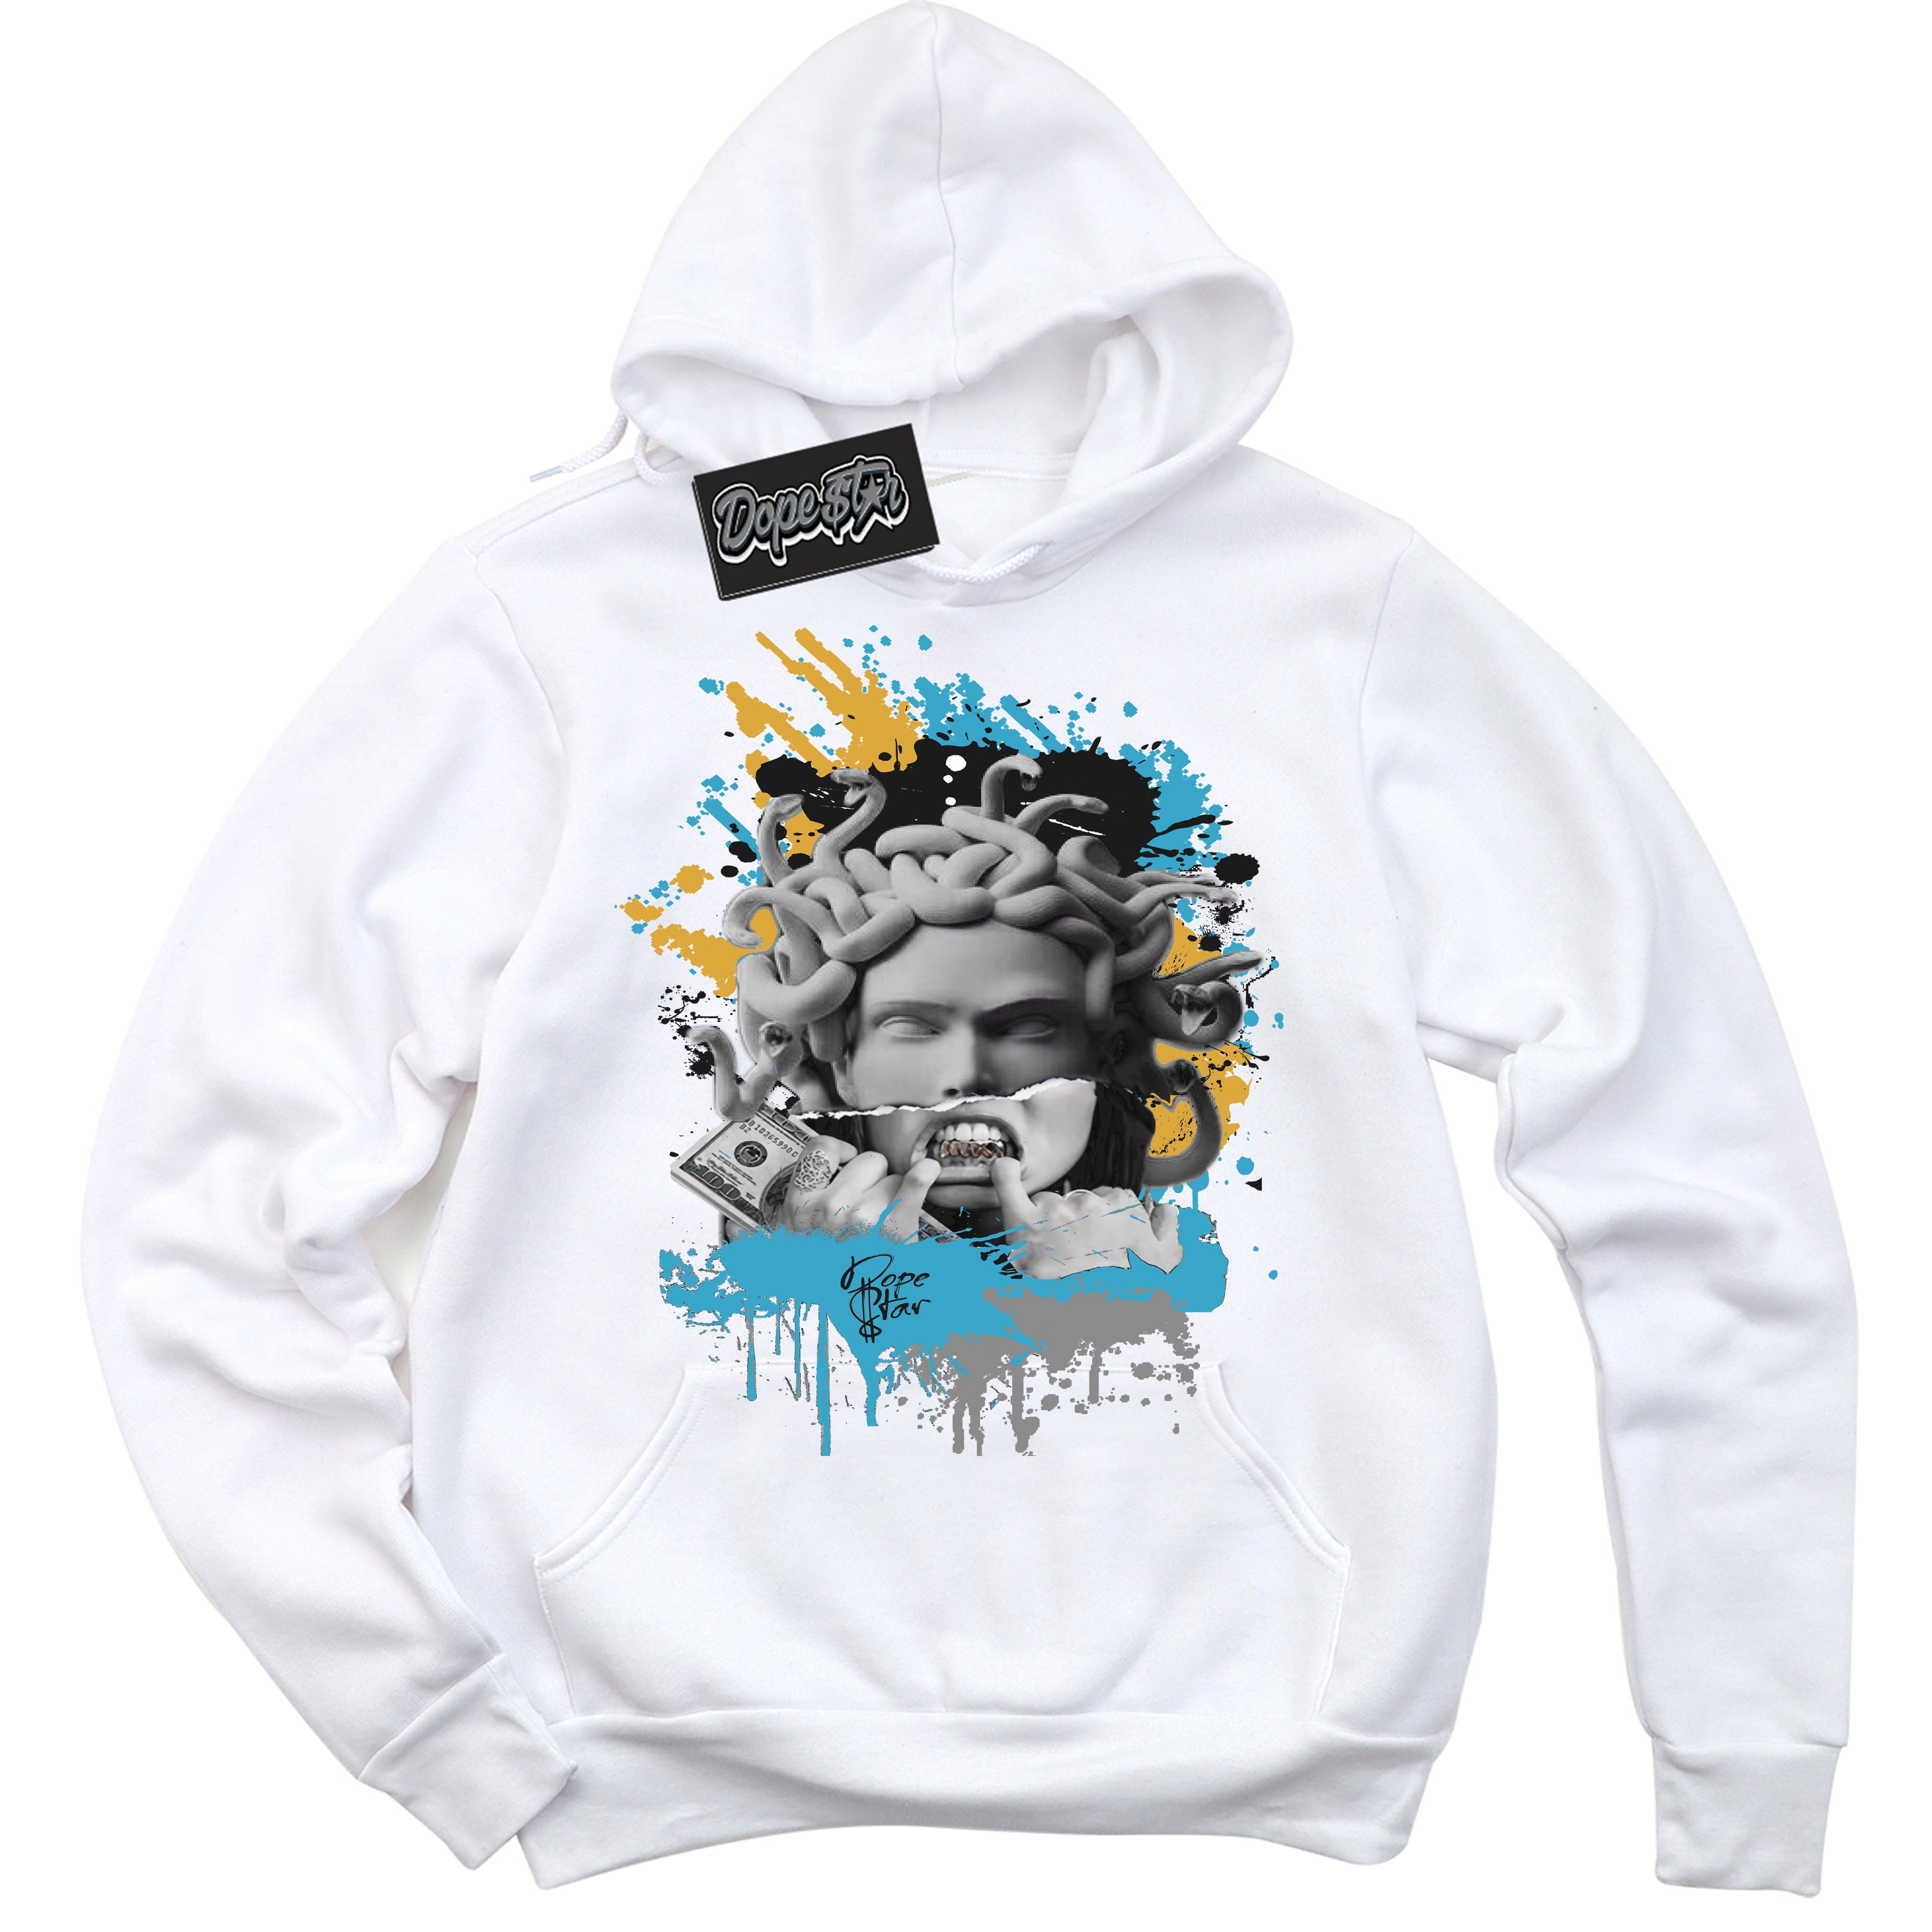 Cool White Hoodie with “ Medusa ”  design that Perfectly Matches Aqua 5s Sneakers.